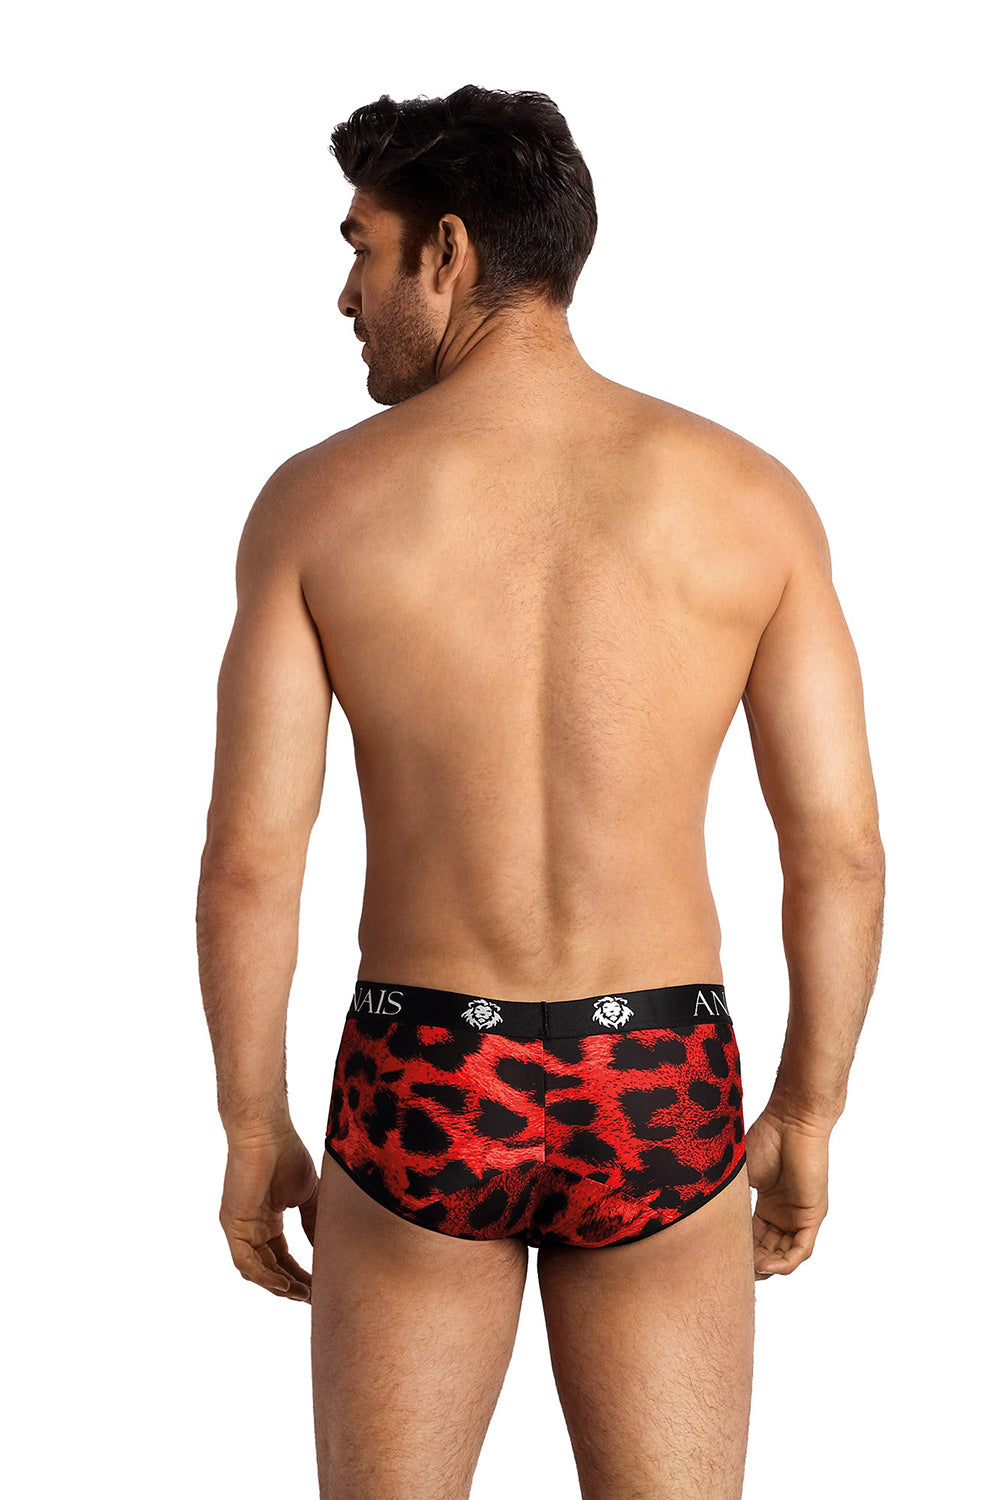 Boxers model 181795 Elsy Style Boxers Shorts, Slips, Swimming Briefs for Men